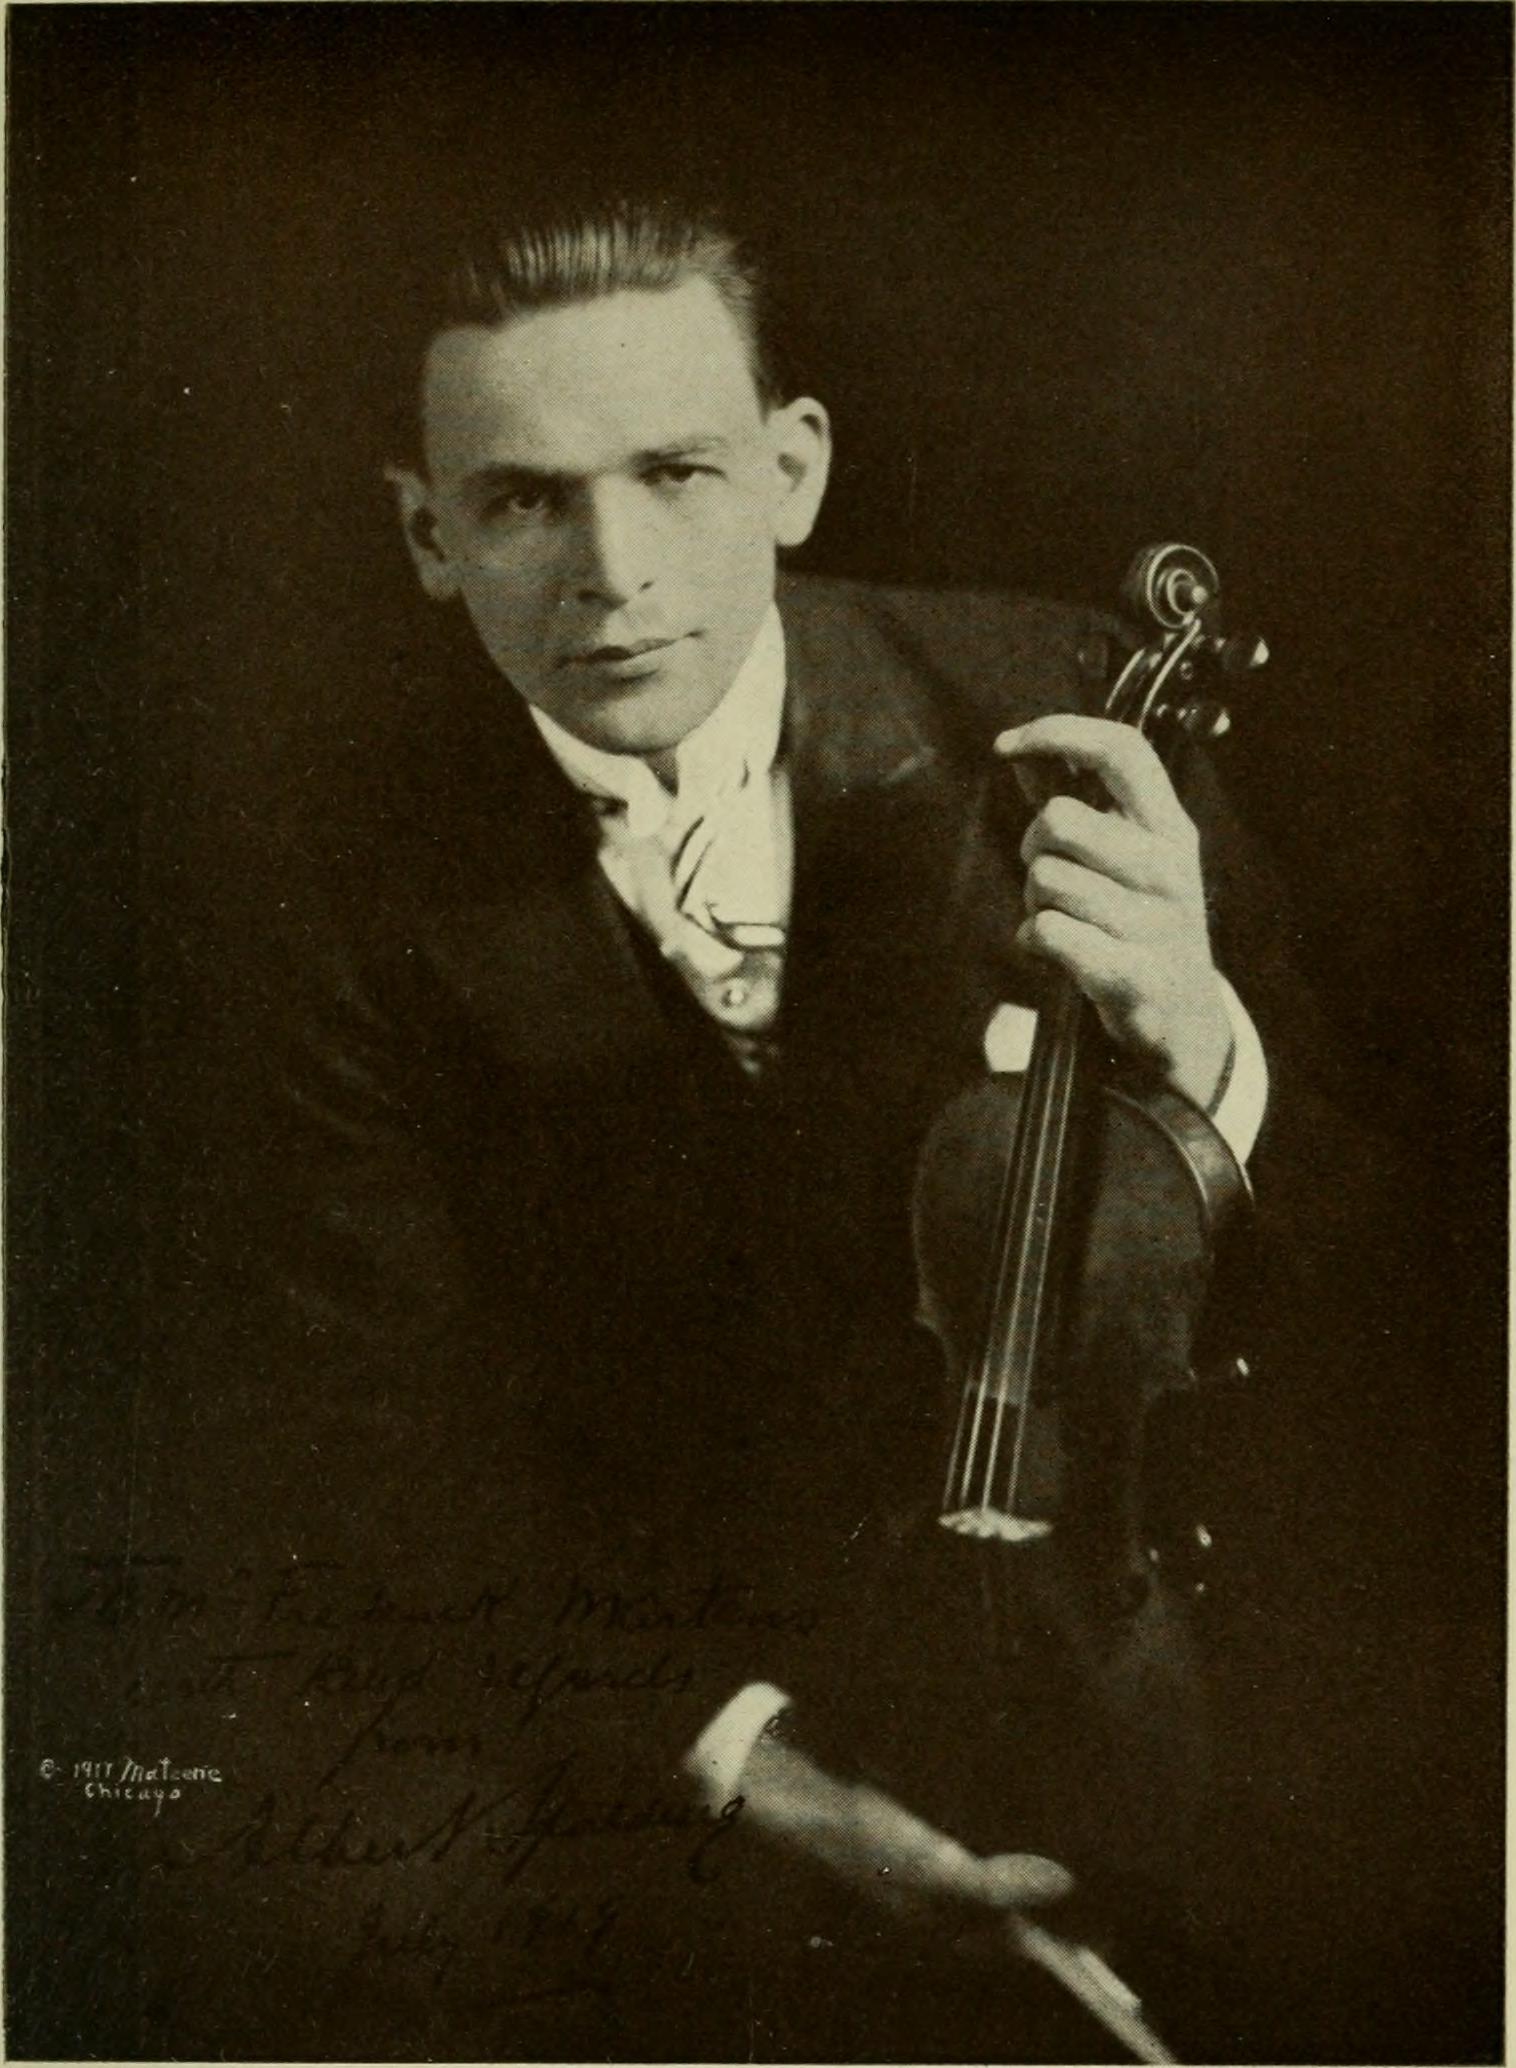 Image from page 278 of "Violin mastery; talks with master violinists and teachers, comprising interviews with Ysaye, Kreisler, Elman, Auer, Thibaud, Heifetz, Hartmann, Maud Powell and others" (1919)